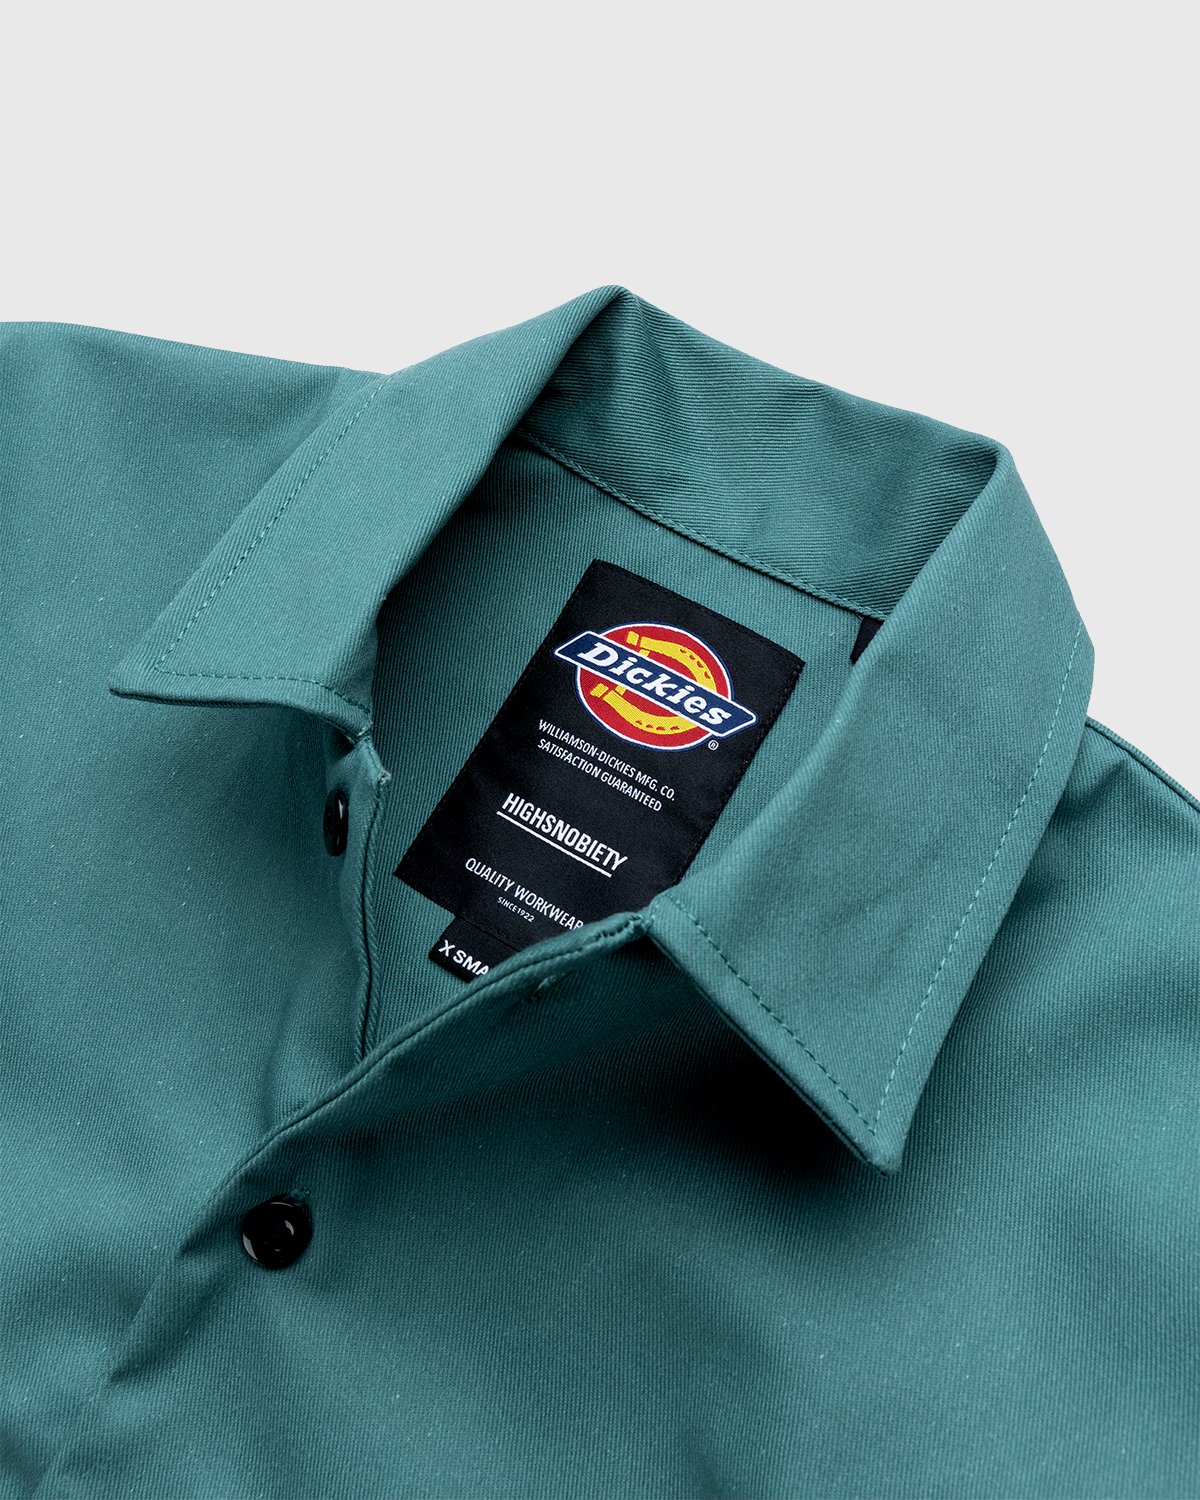 Highsnobiety x Dickies - Service Shirt Lincoln Green - Clothing - Green - Image 3